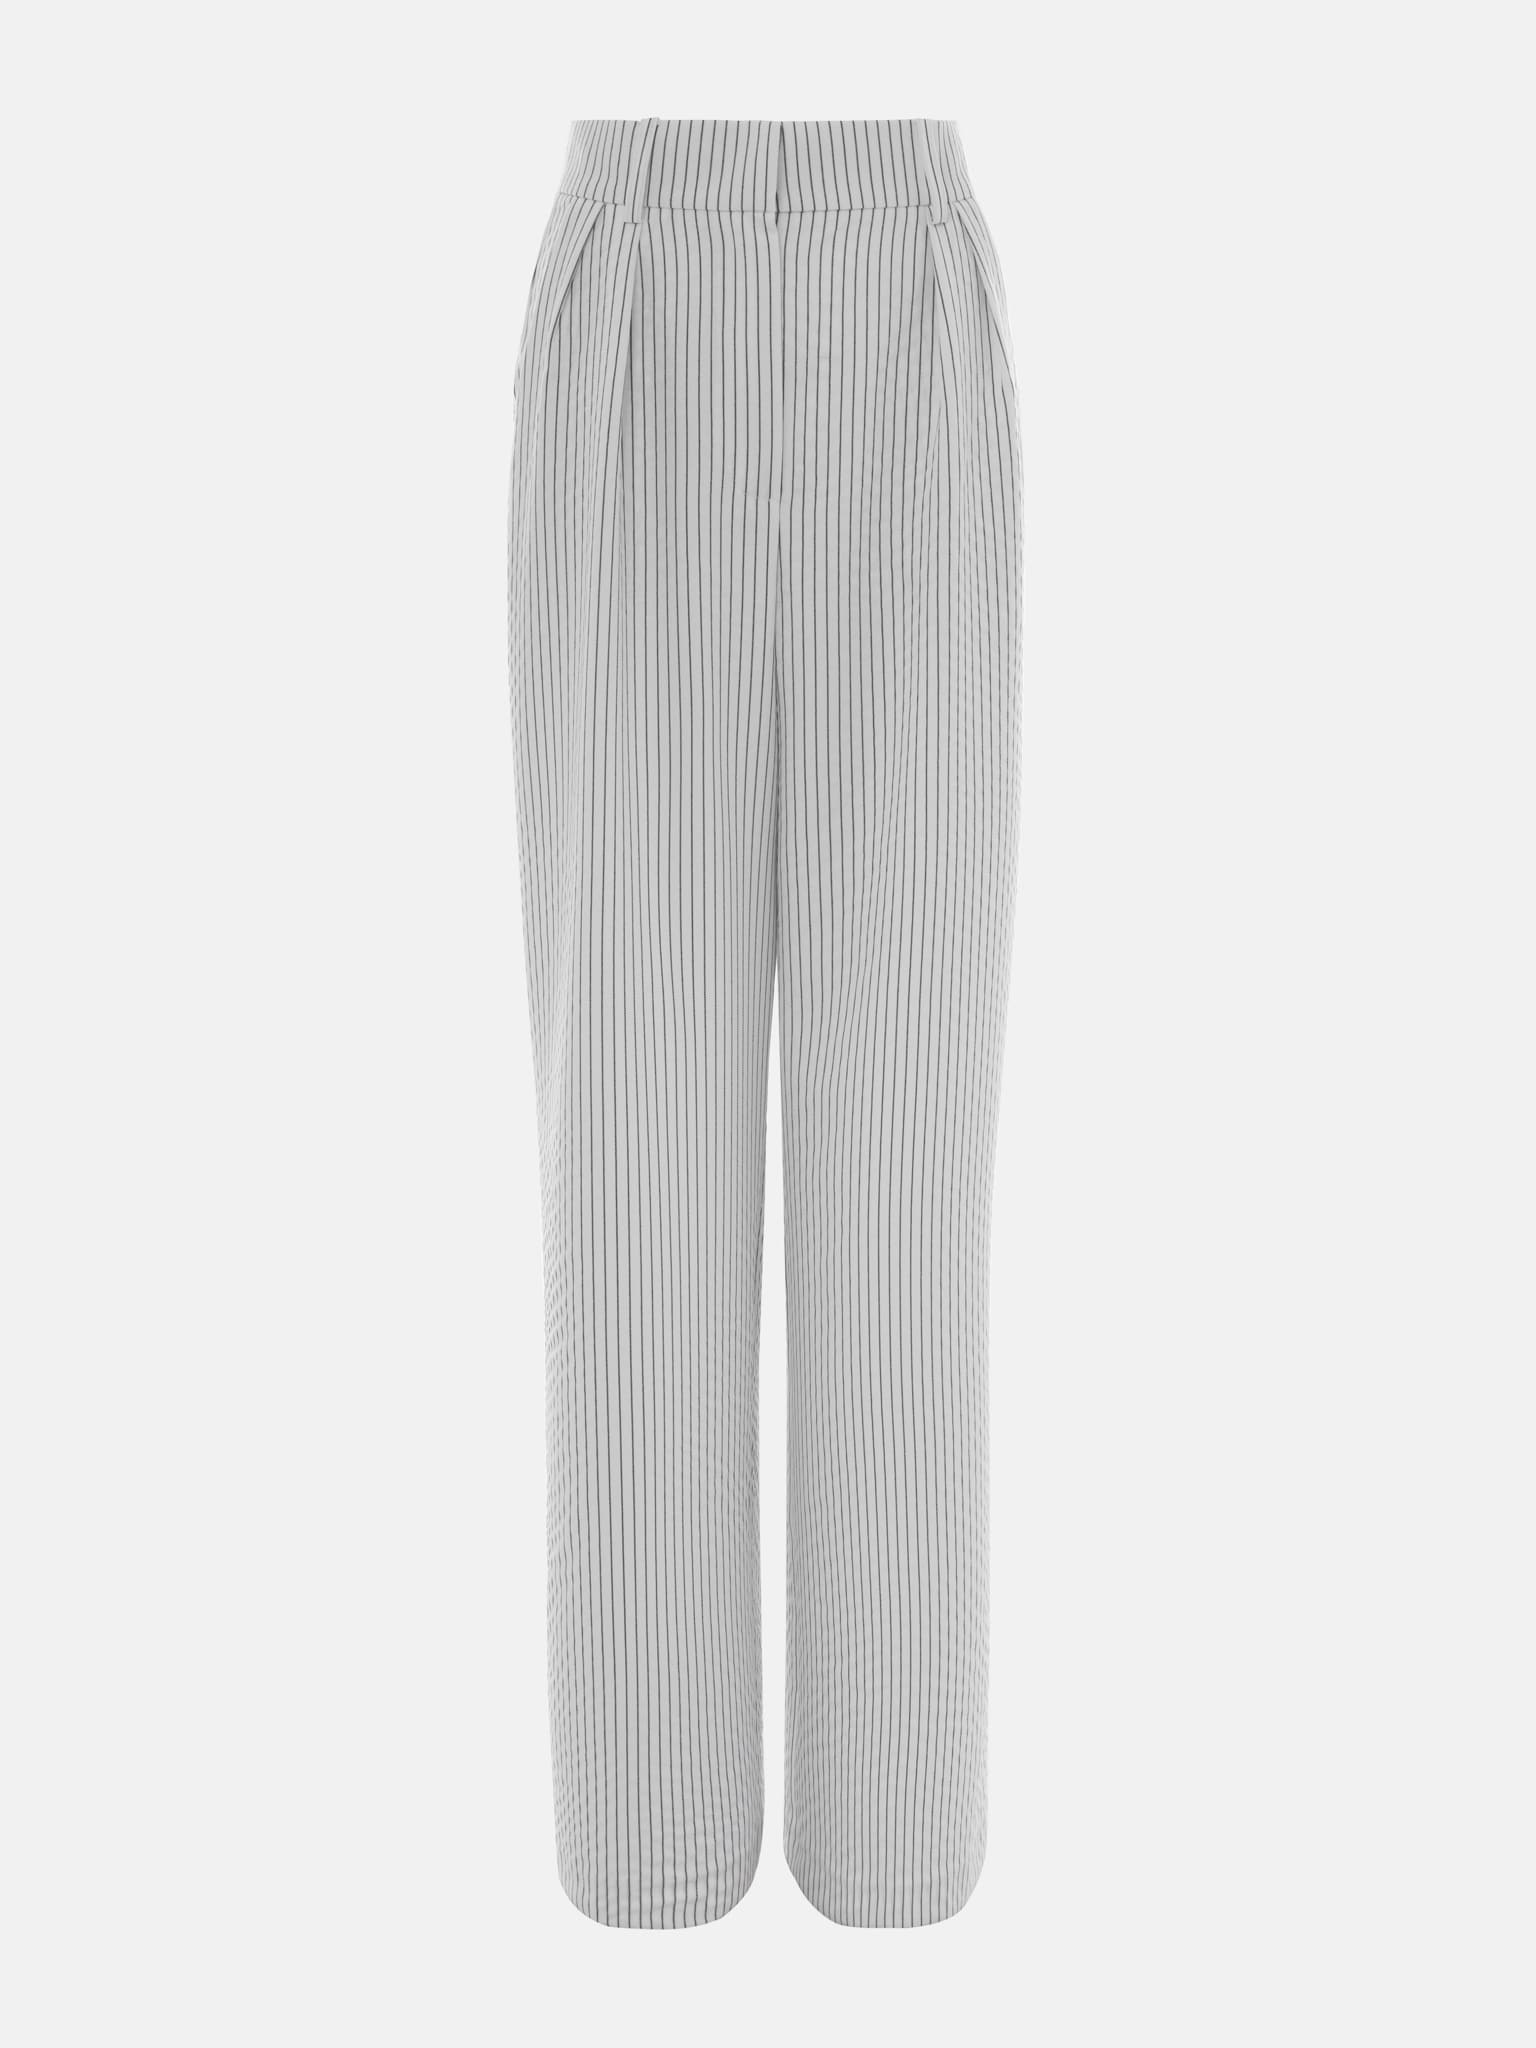 Thin-striped trousers with waist pleats :: LICHI - Online fashion store